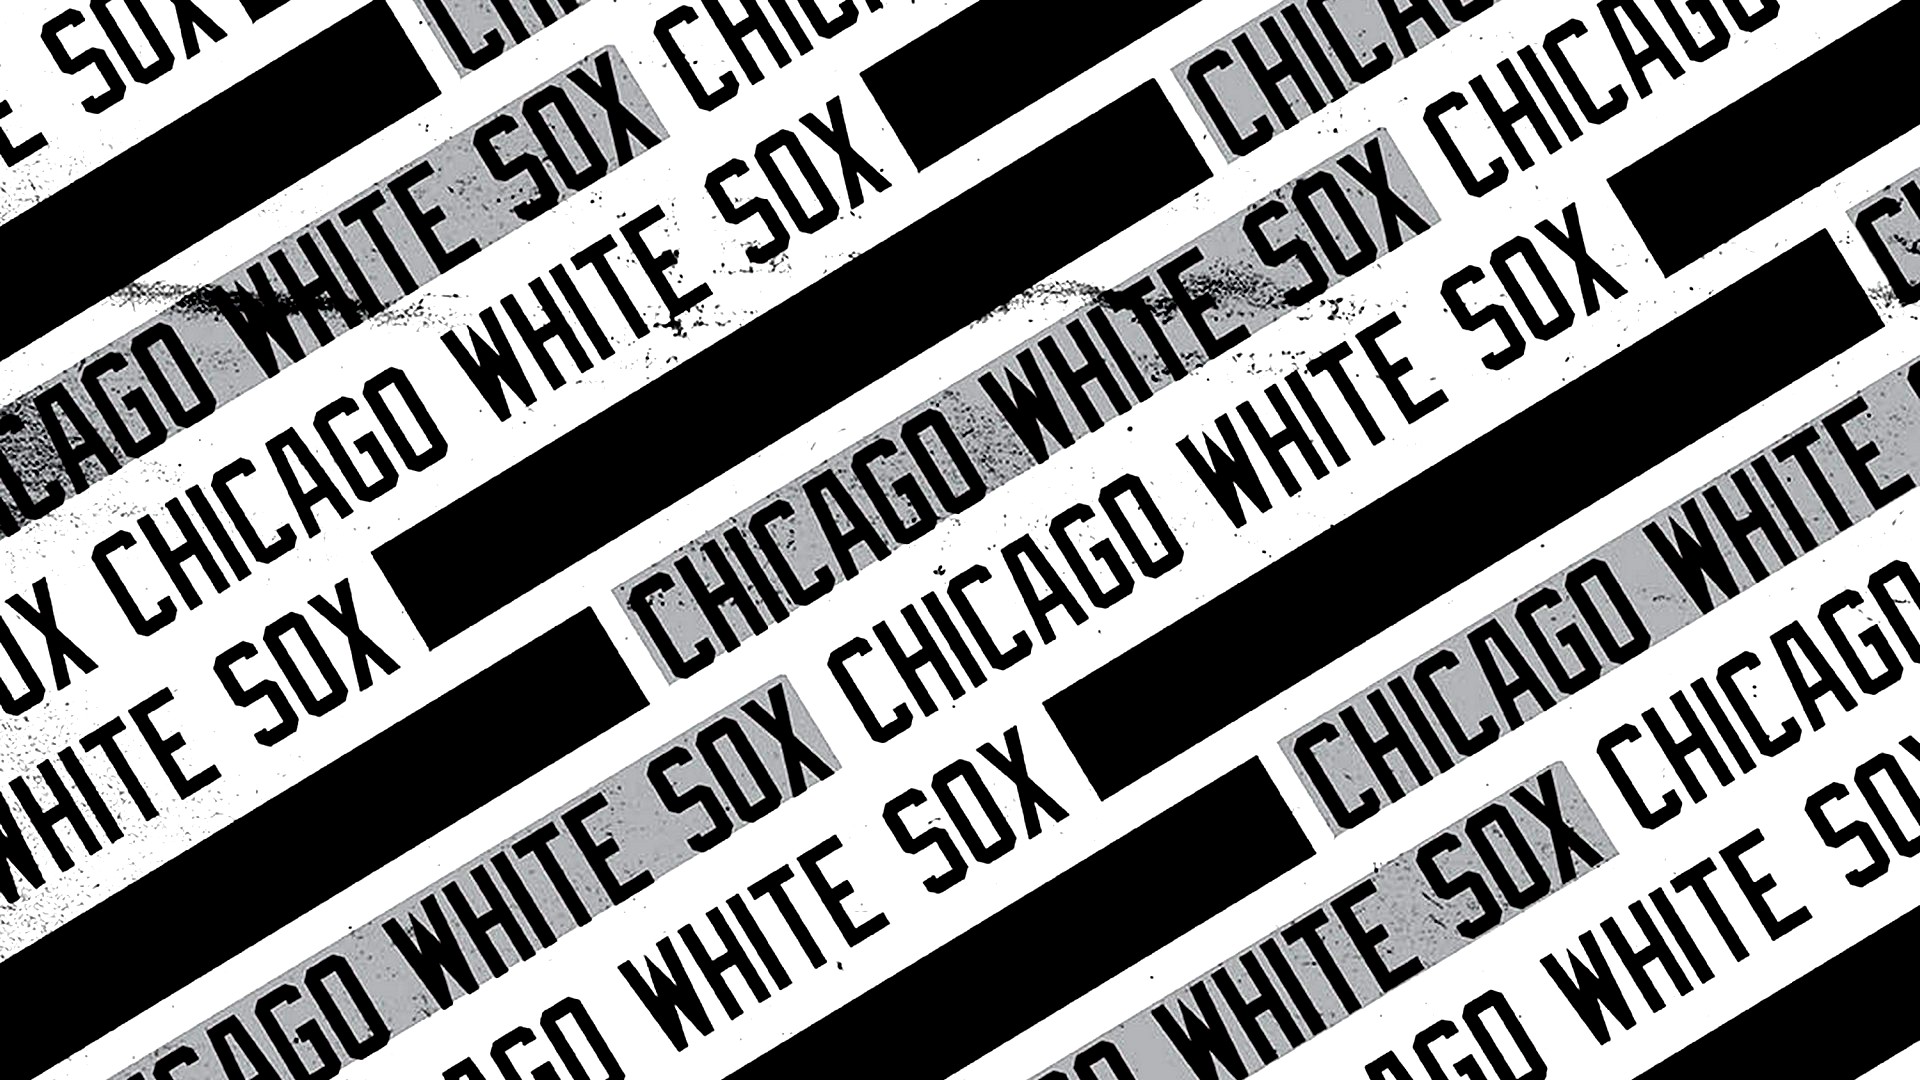 Chicago White Sox For Desktop Wallpaper with high-resolution 1920x1080 pixel. You can use this wallpaper for Mac Desktop Wallpaper, Laptop Screensavers, Android Wallpapers, Tablet or iPhone Home Screen and another mobile phone device